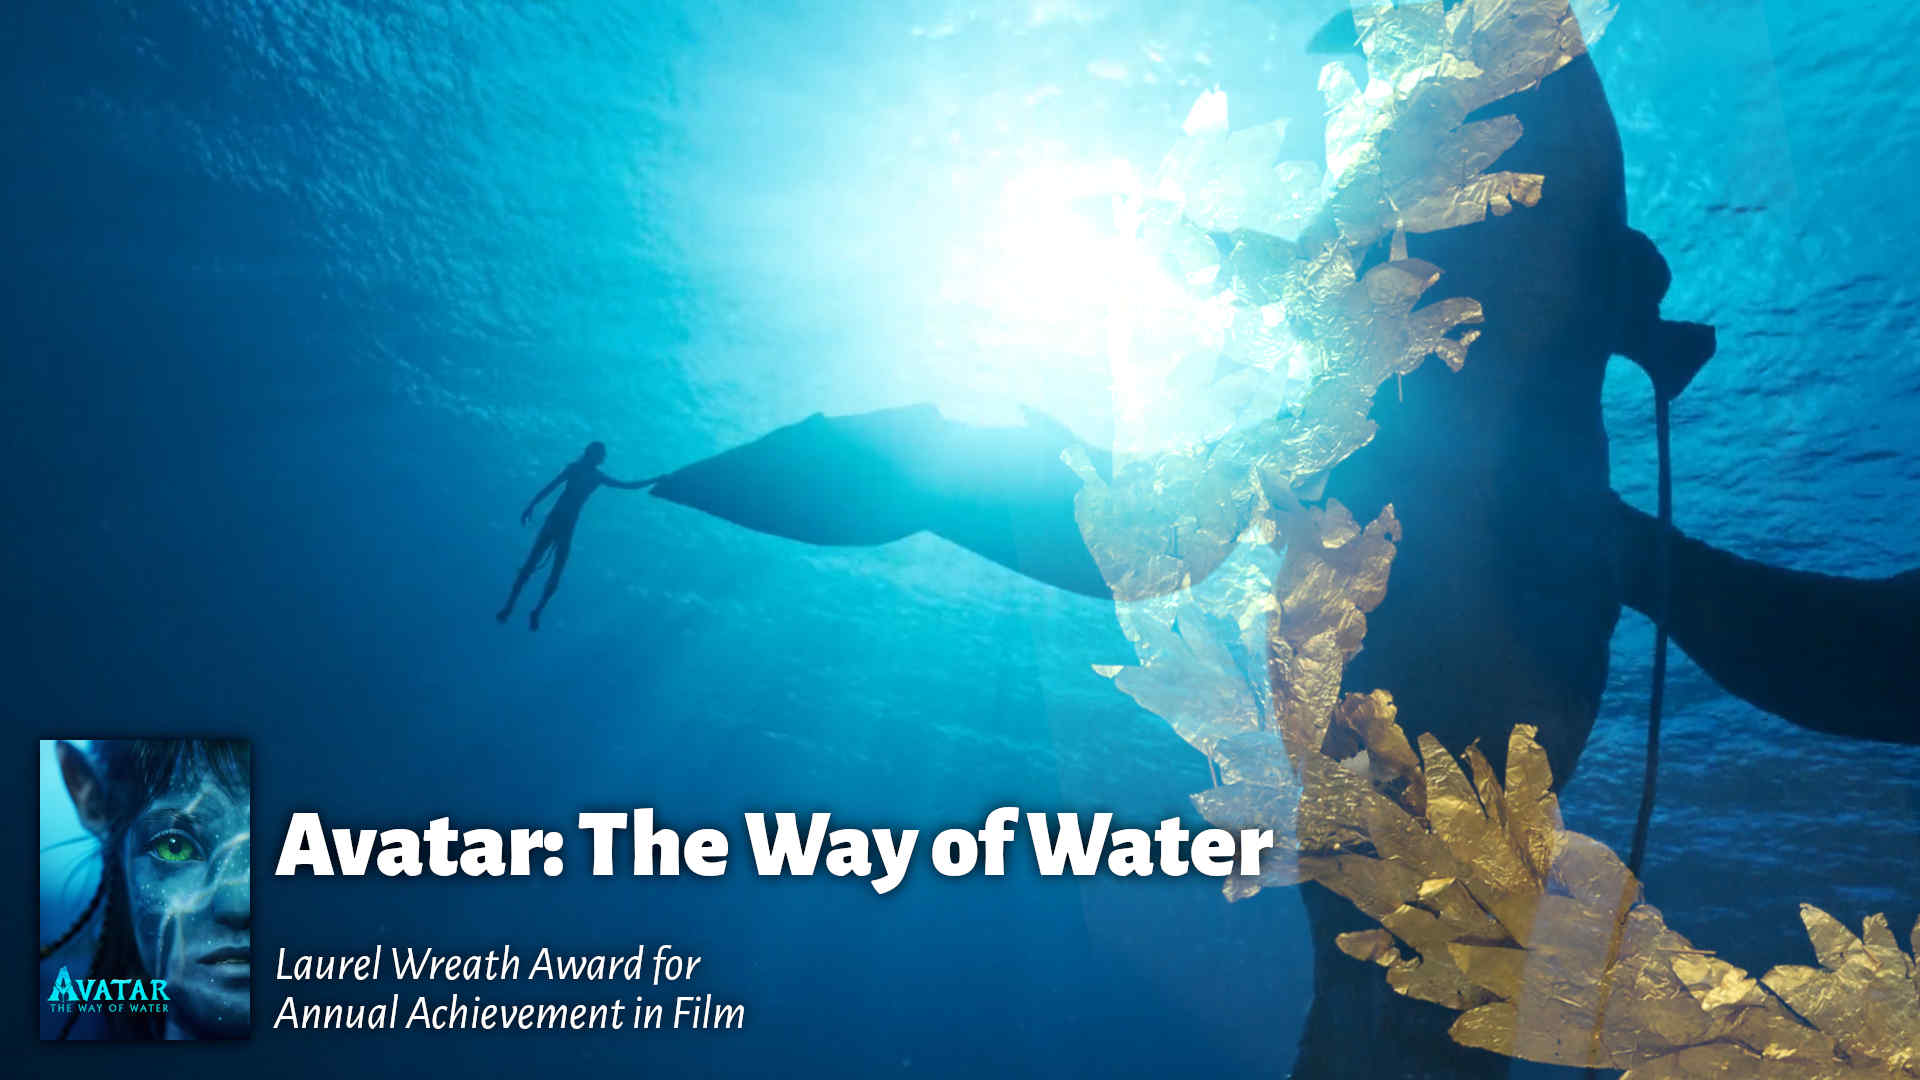 And the award goes to… Avatar 2: The Way of Water!